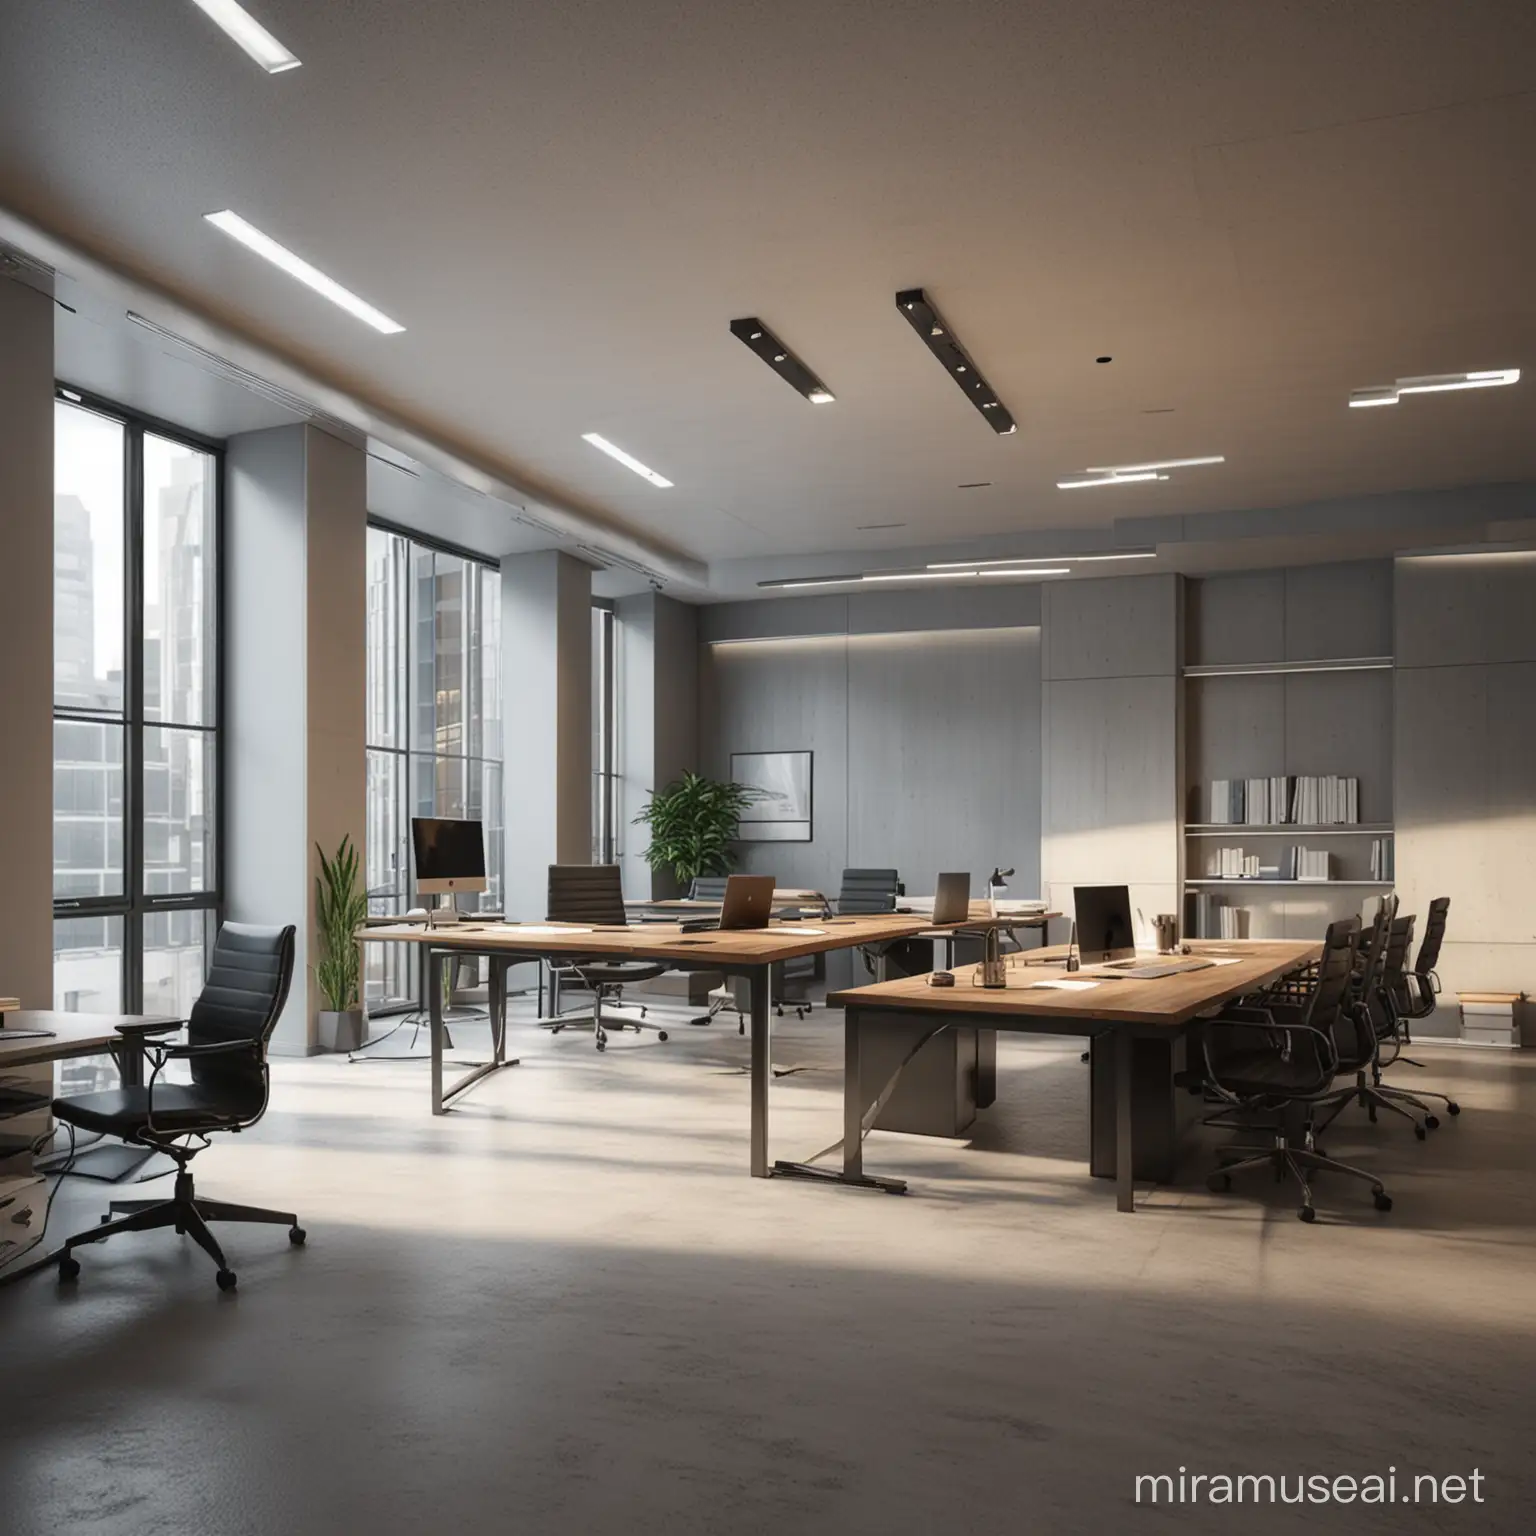 Corporate Office Space 3D Photorealistic Rendering with HighQuality Lighting and Textures